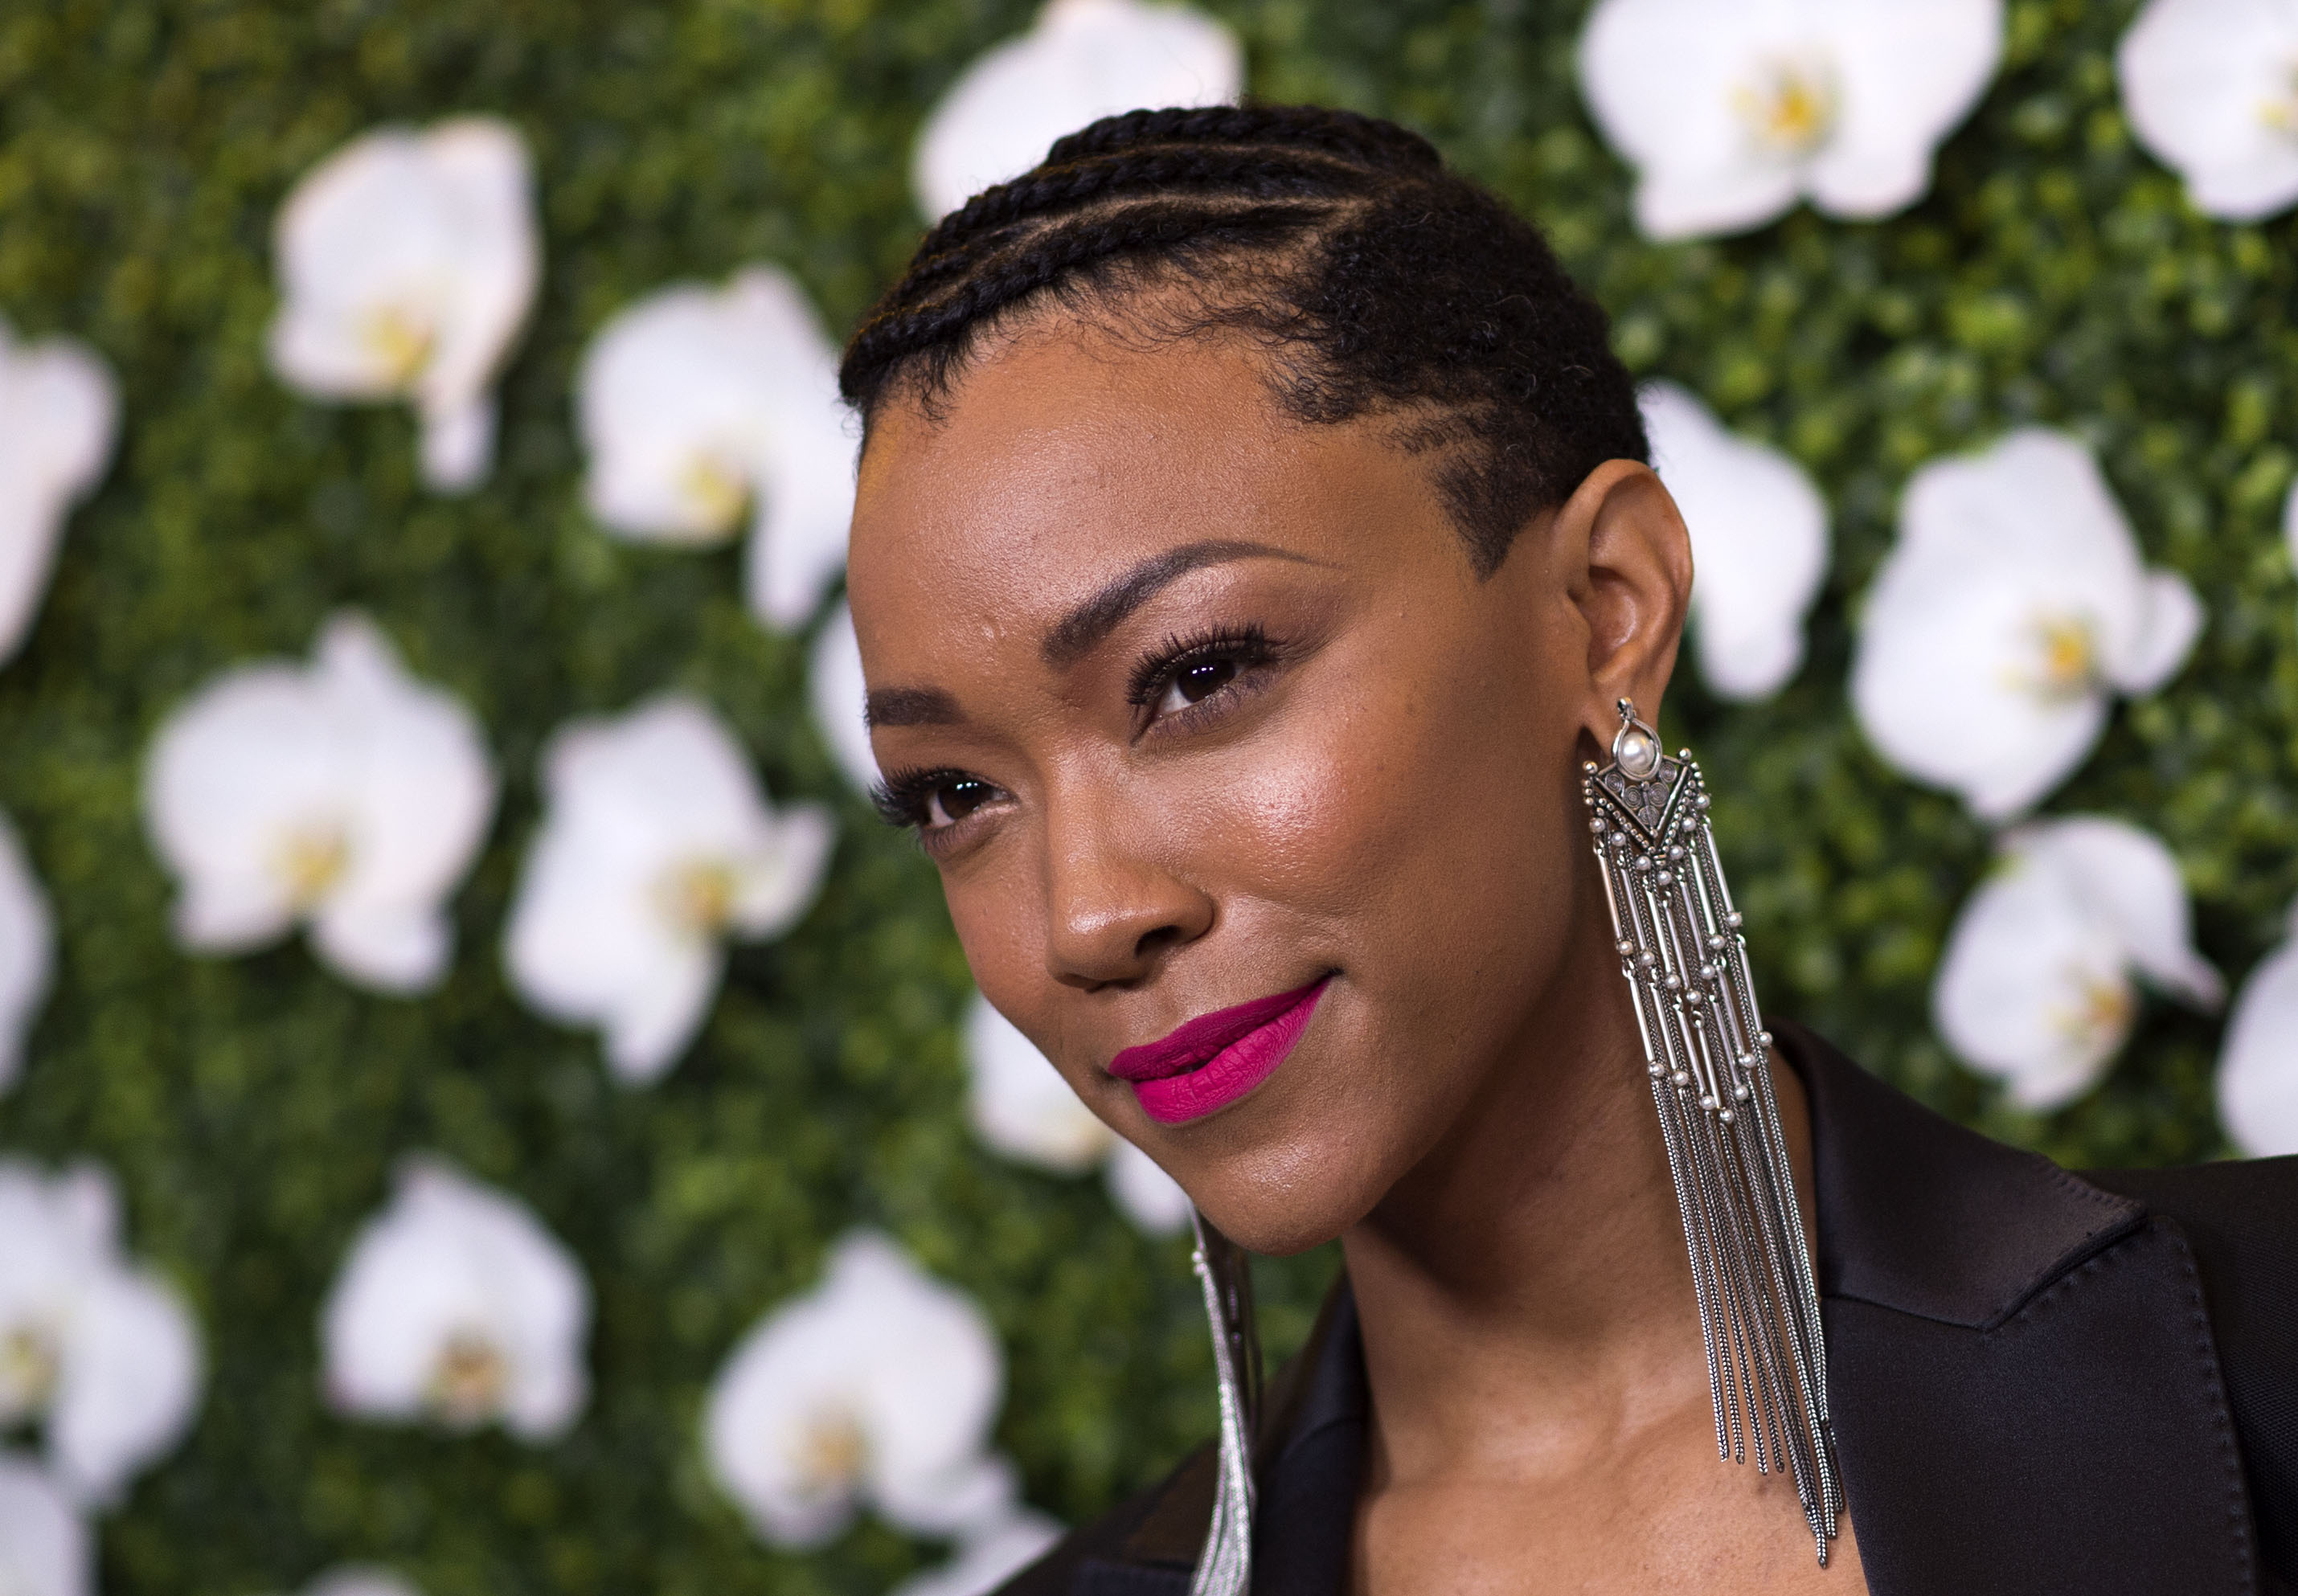 Actress Sonequa Martin-Green attends The CBS EyeSpeak Summit at the Pacific Design Center on March 14, 2018, in West Hollywood, California.